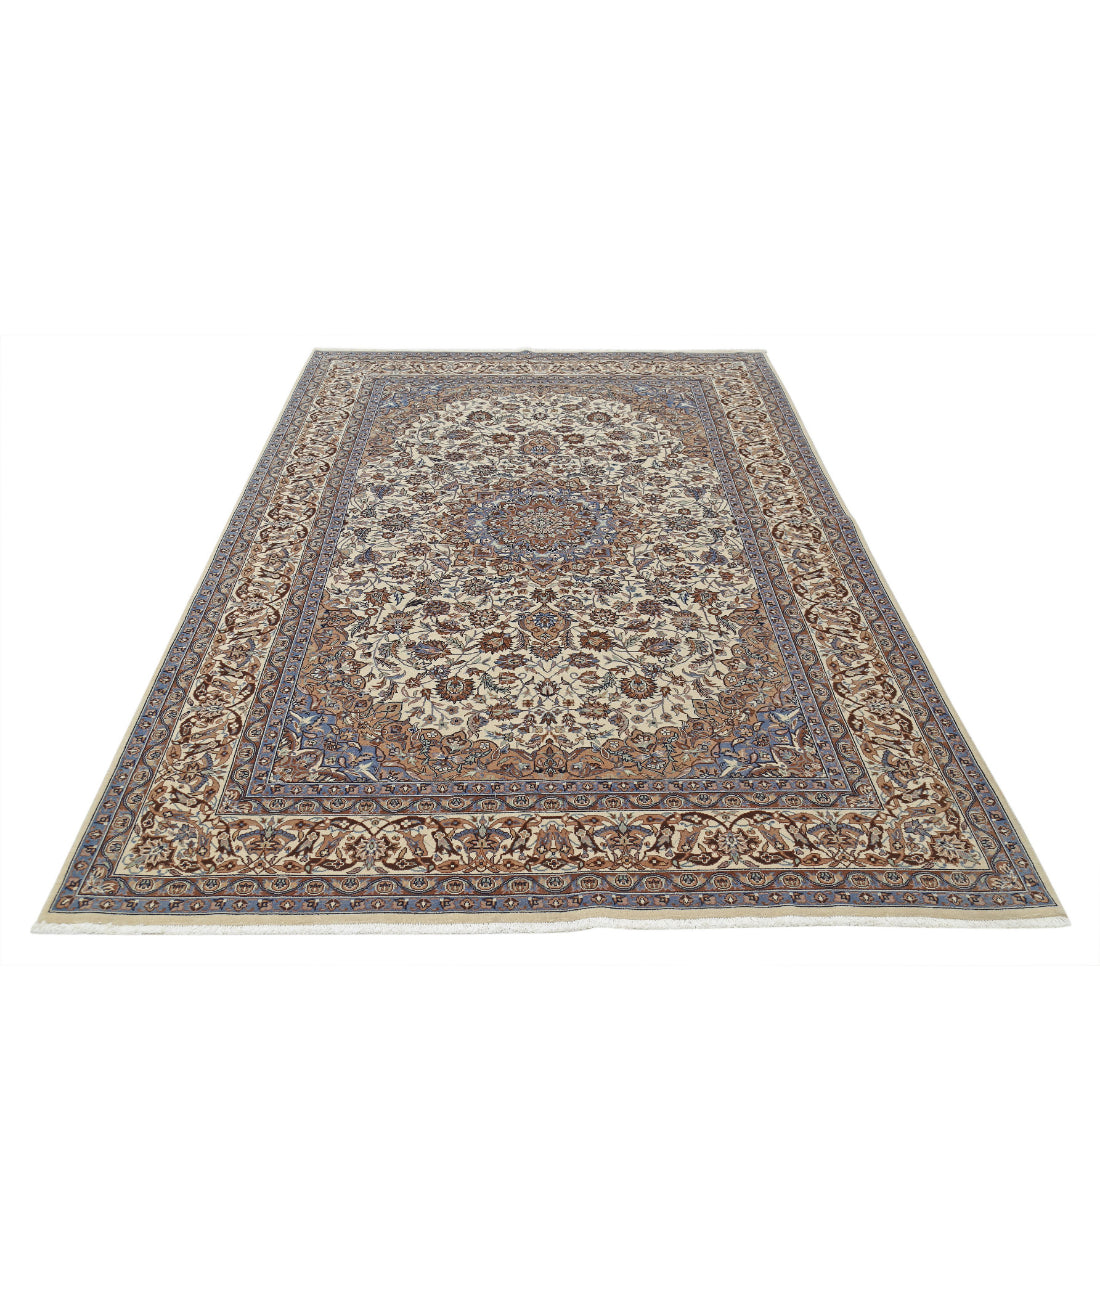 Hand Knotted Heritage Persian Style Wool Rug - 5'11'' x 8'11'' 5'11'' x 8'11'' (178 X 268) / Ivory / Blue